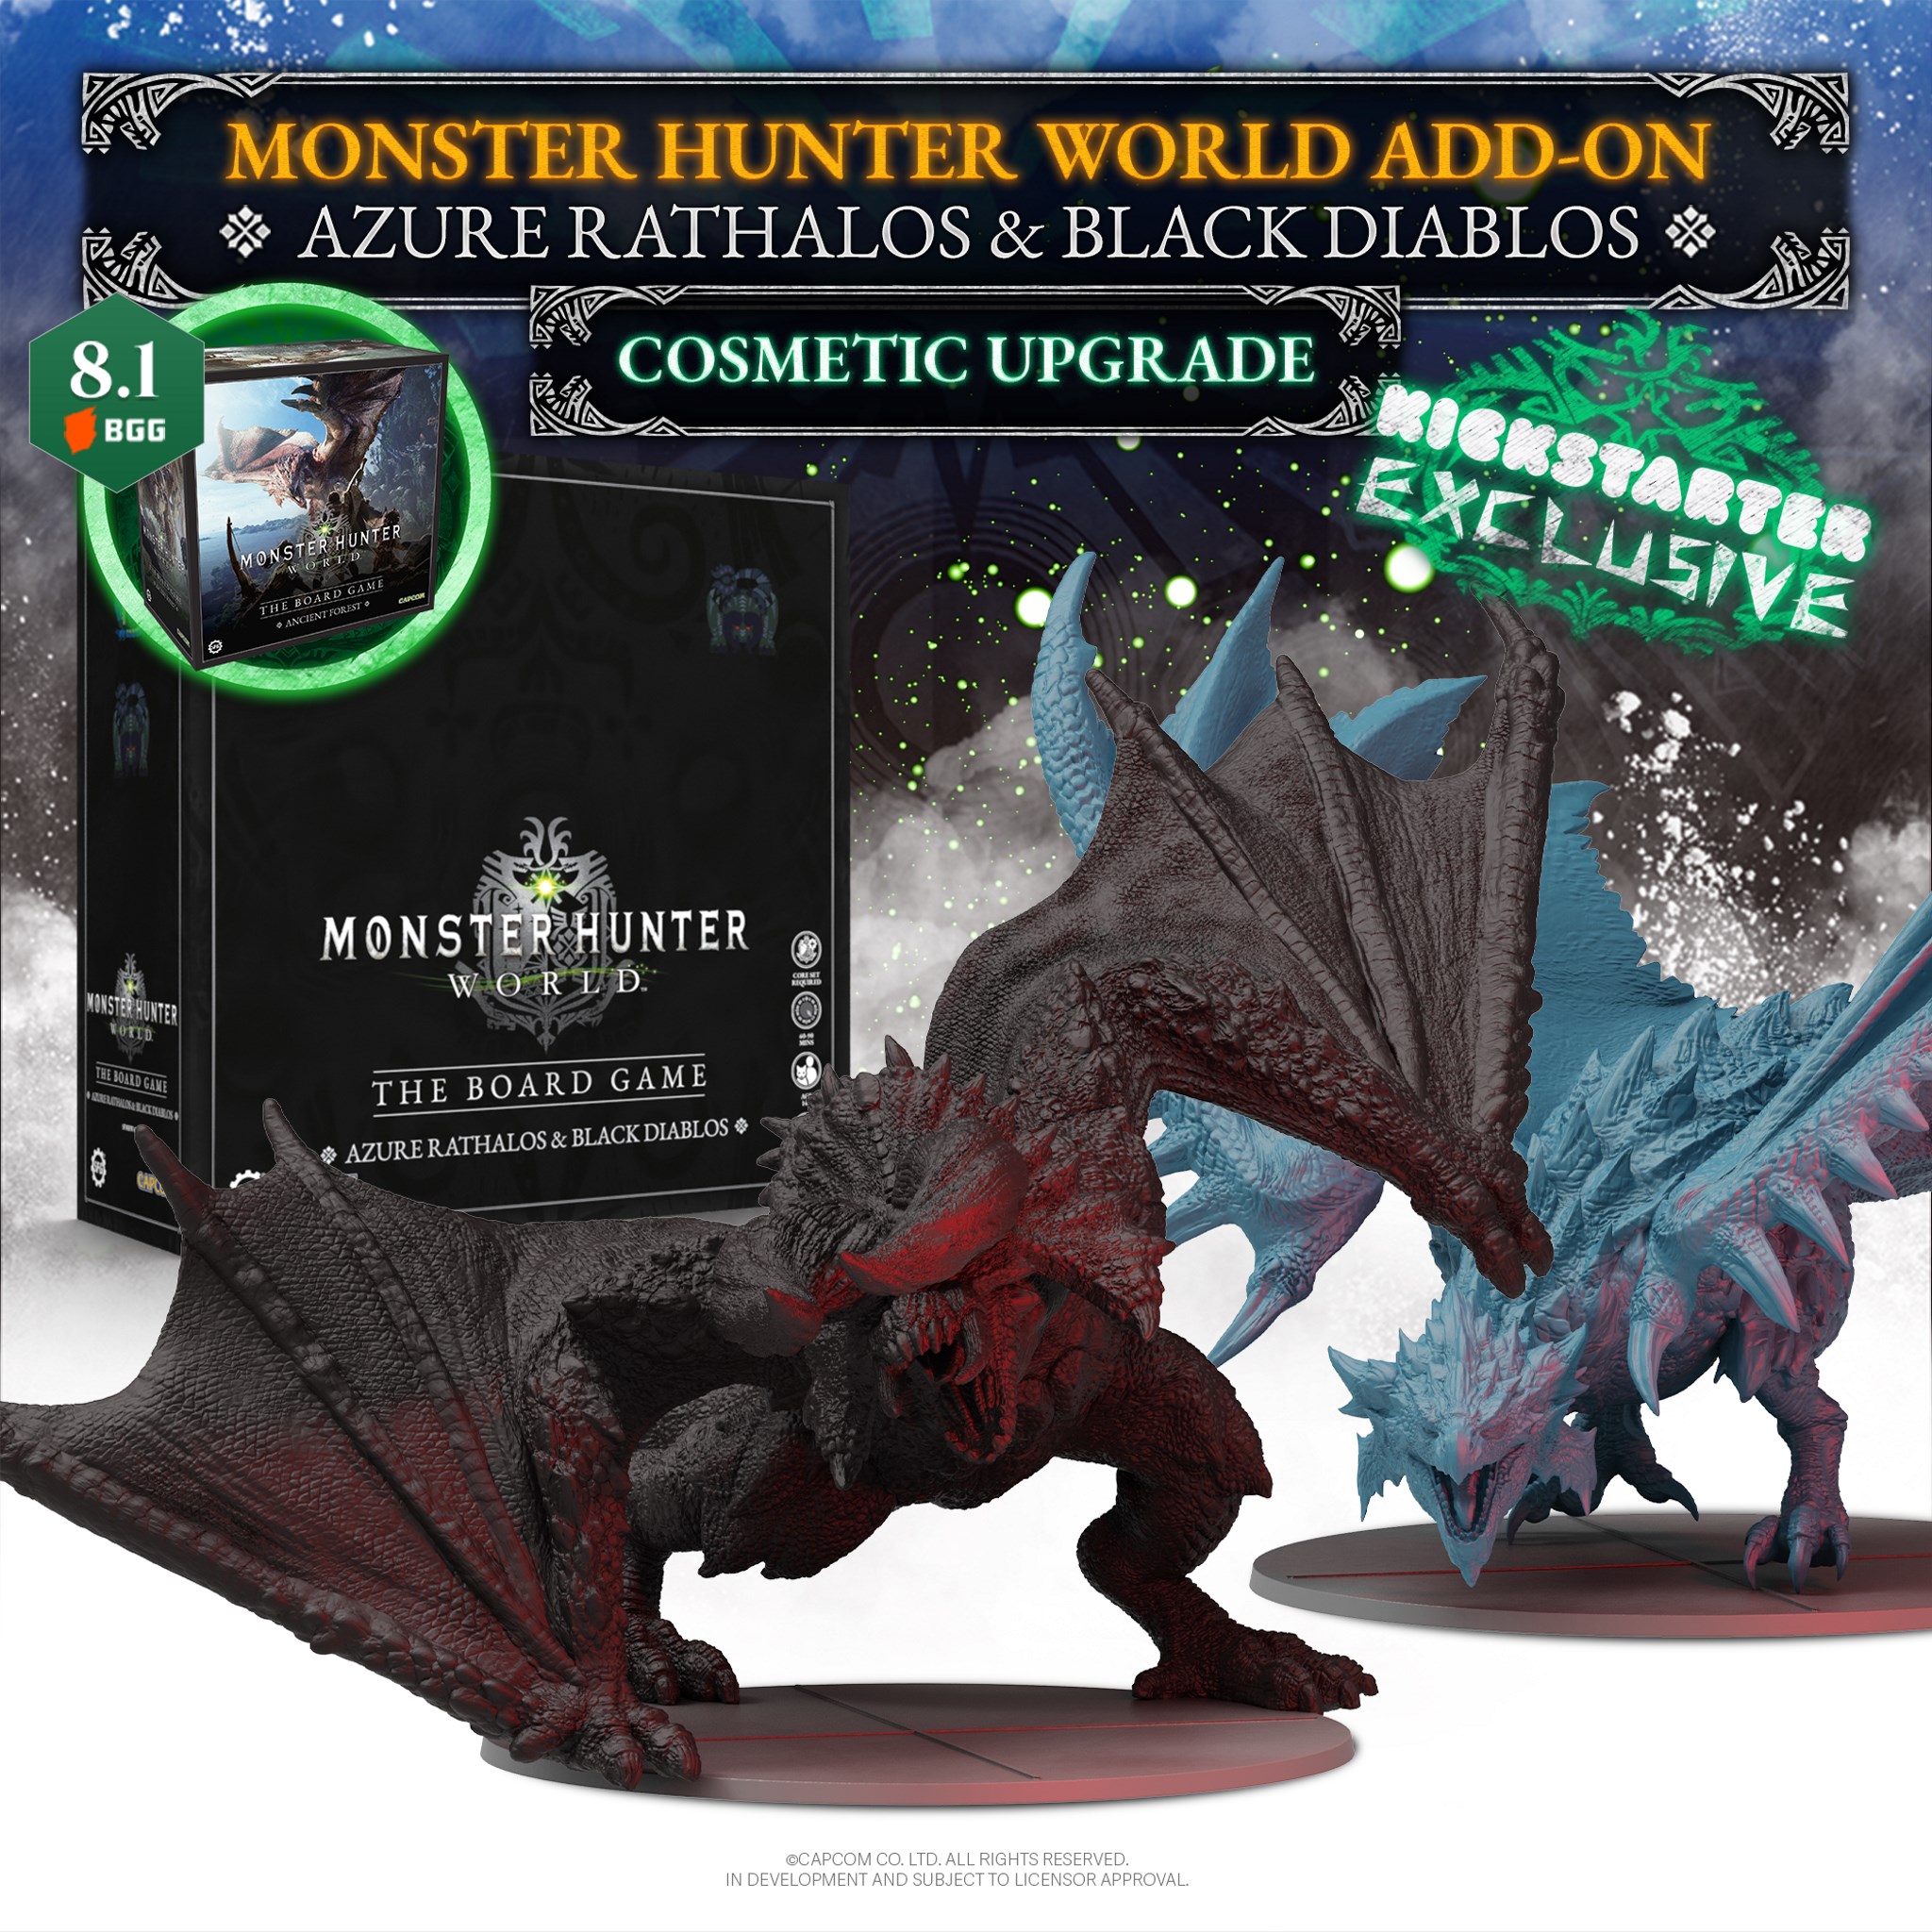 Monster Hunter World Iceborne: The Board Game by Steamforged Games